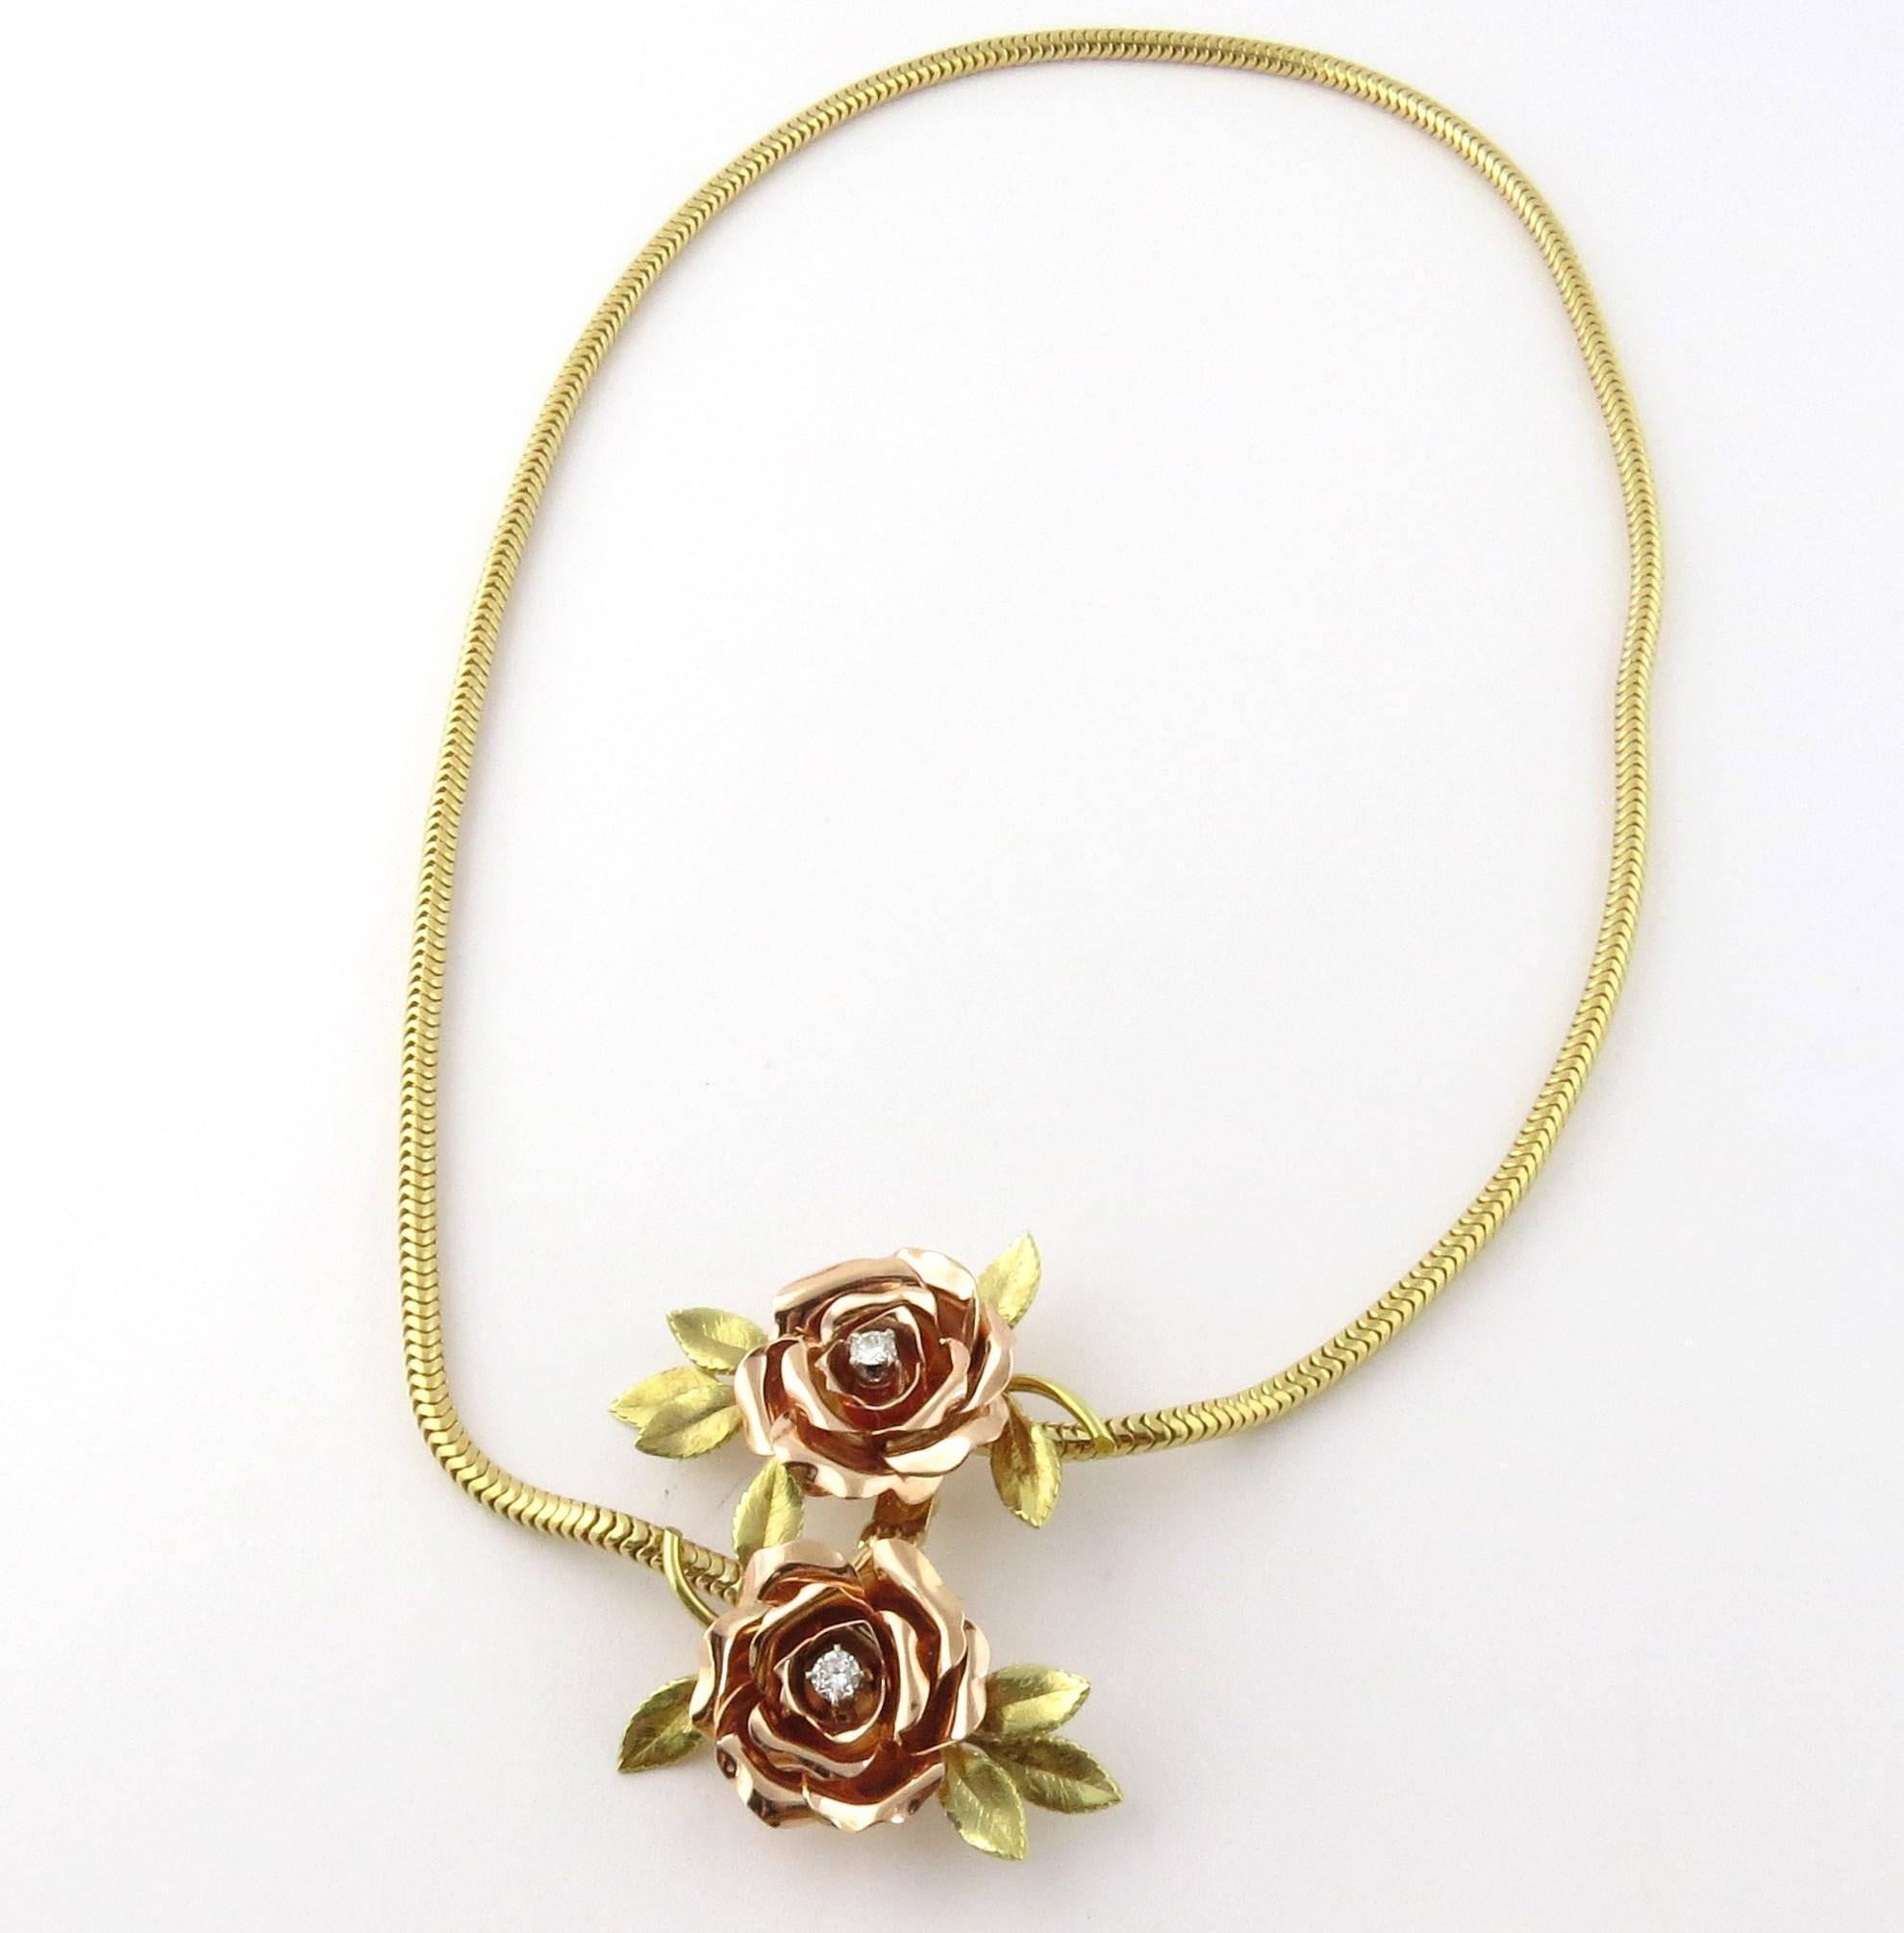 Vintage 14K Yellow and Rose Gold Rose Necklace 

This beautifully detailed necklace shows amazing craftsmanship. 

Two roses are found at each end of the snake chain. The petals are individually crafted out of rose gold. A hidden tension clasp gives